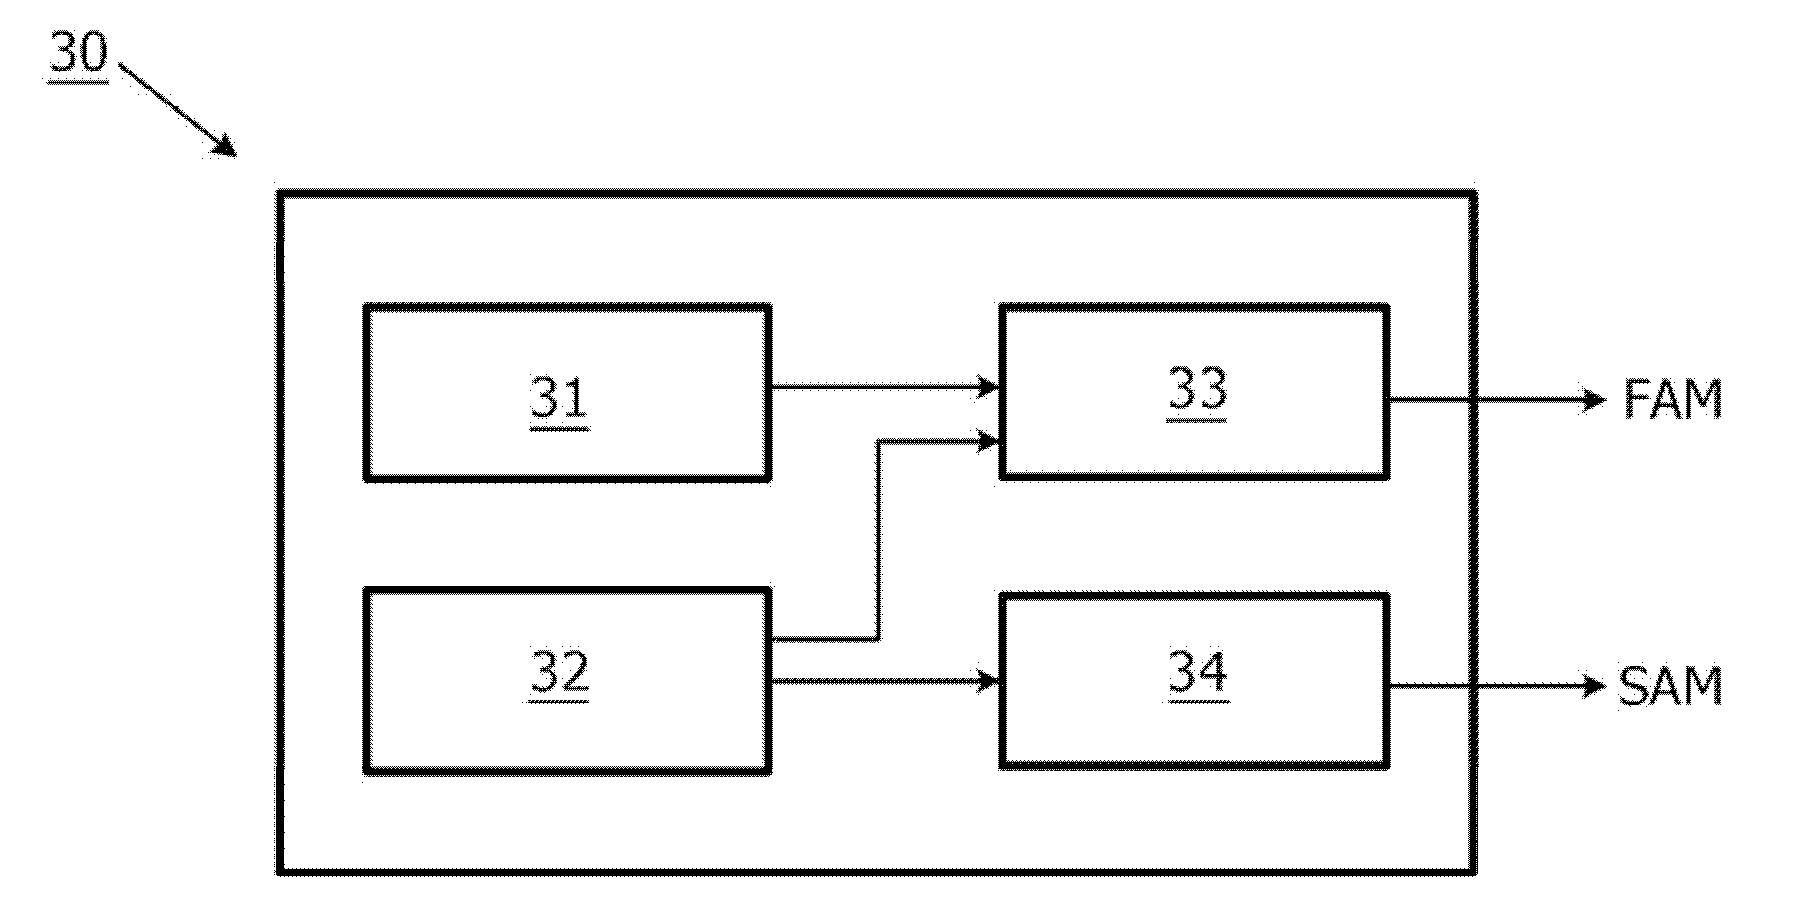 Method and apparatus for fall detection and alarm